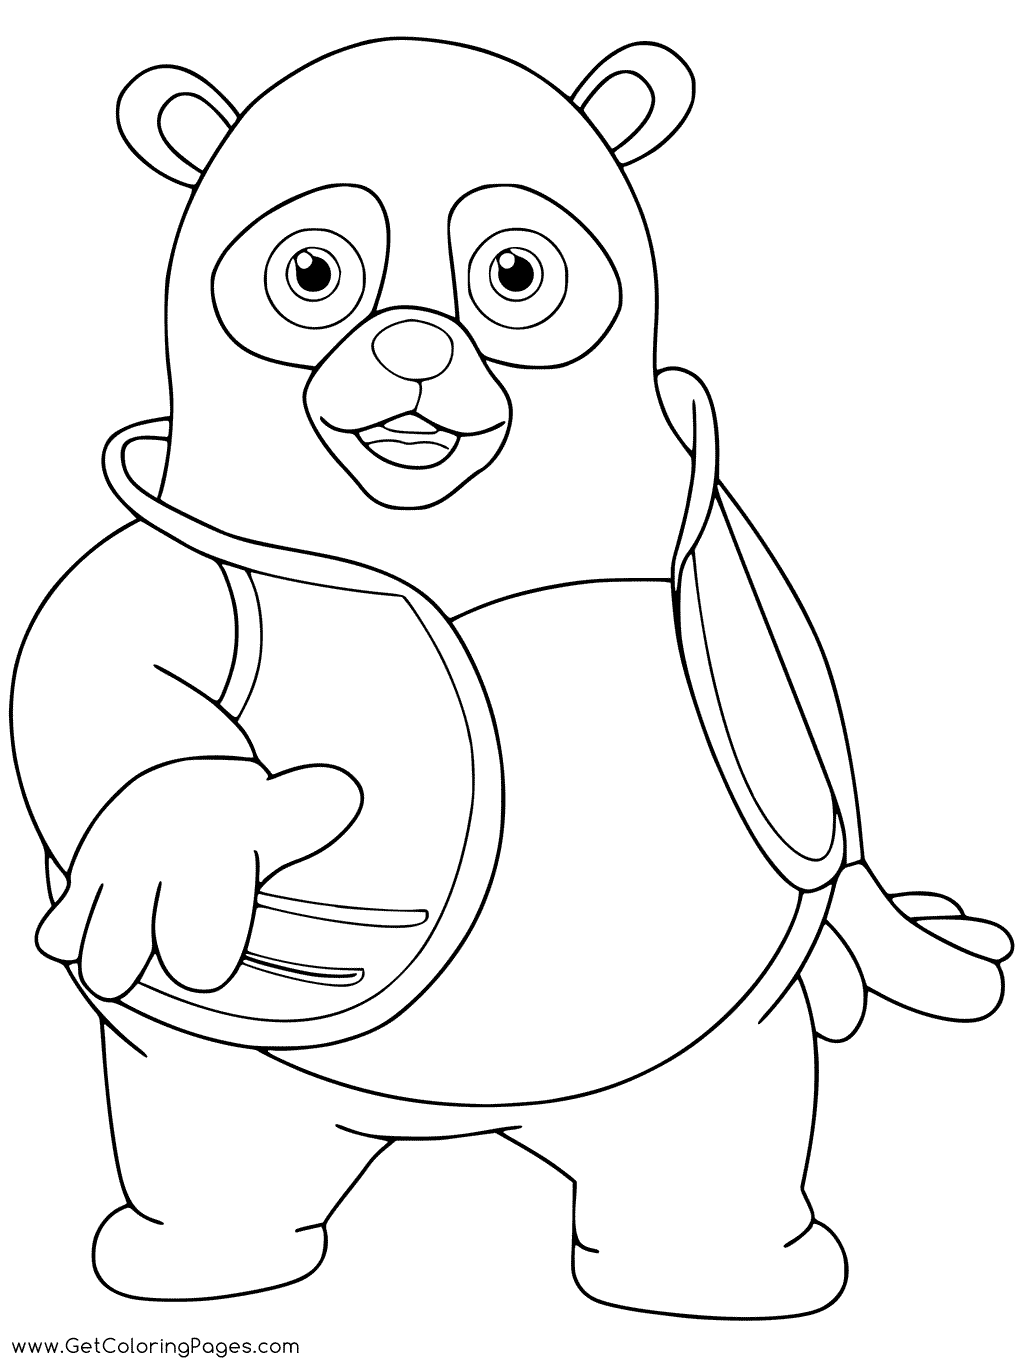 Teddy Bear Agent Oso Coloring Pages - Get Coloring Pages